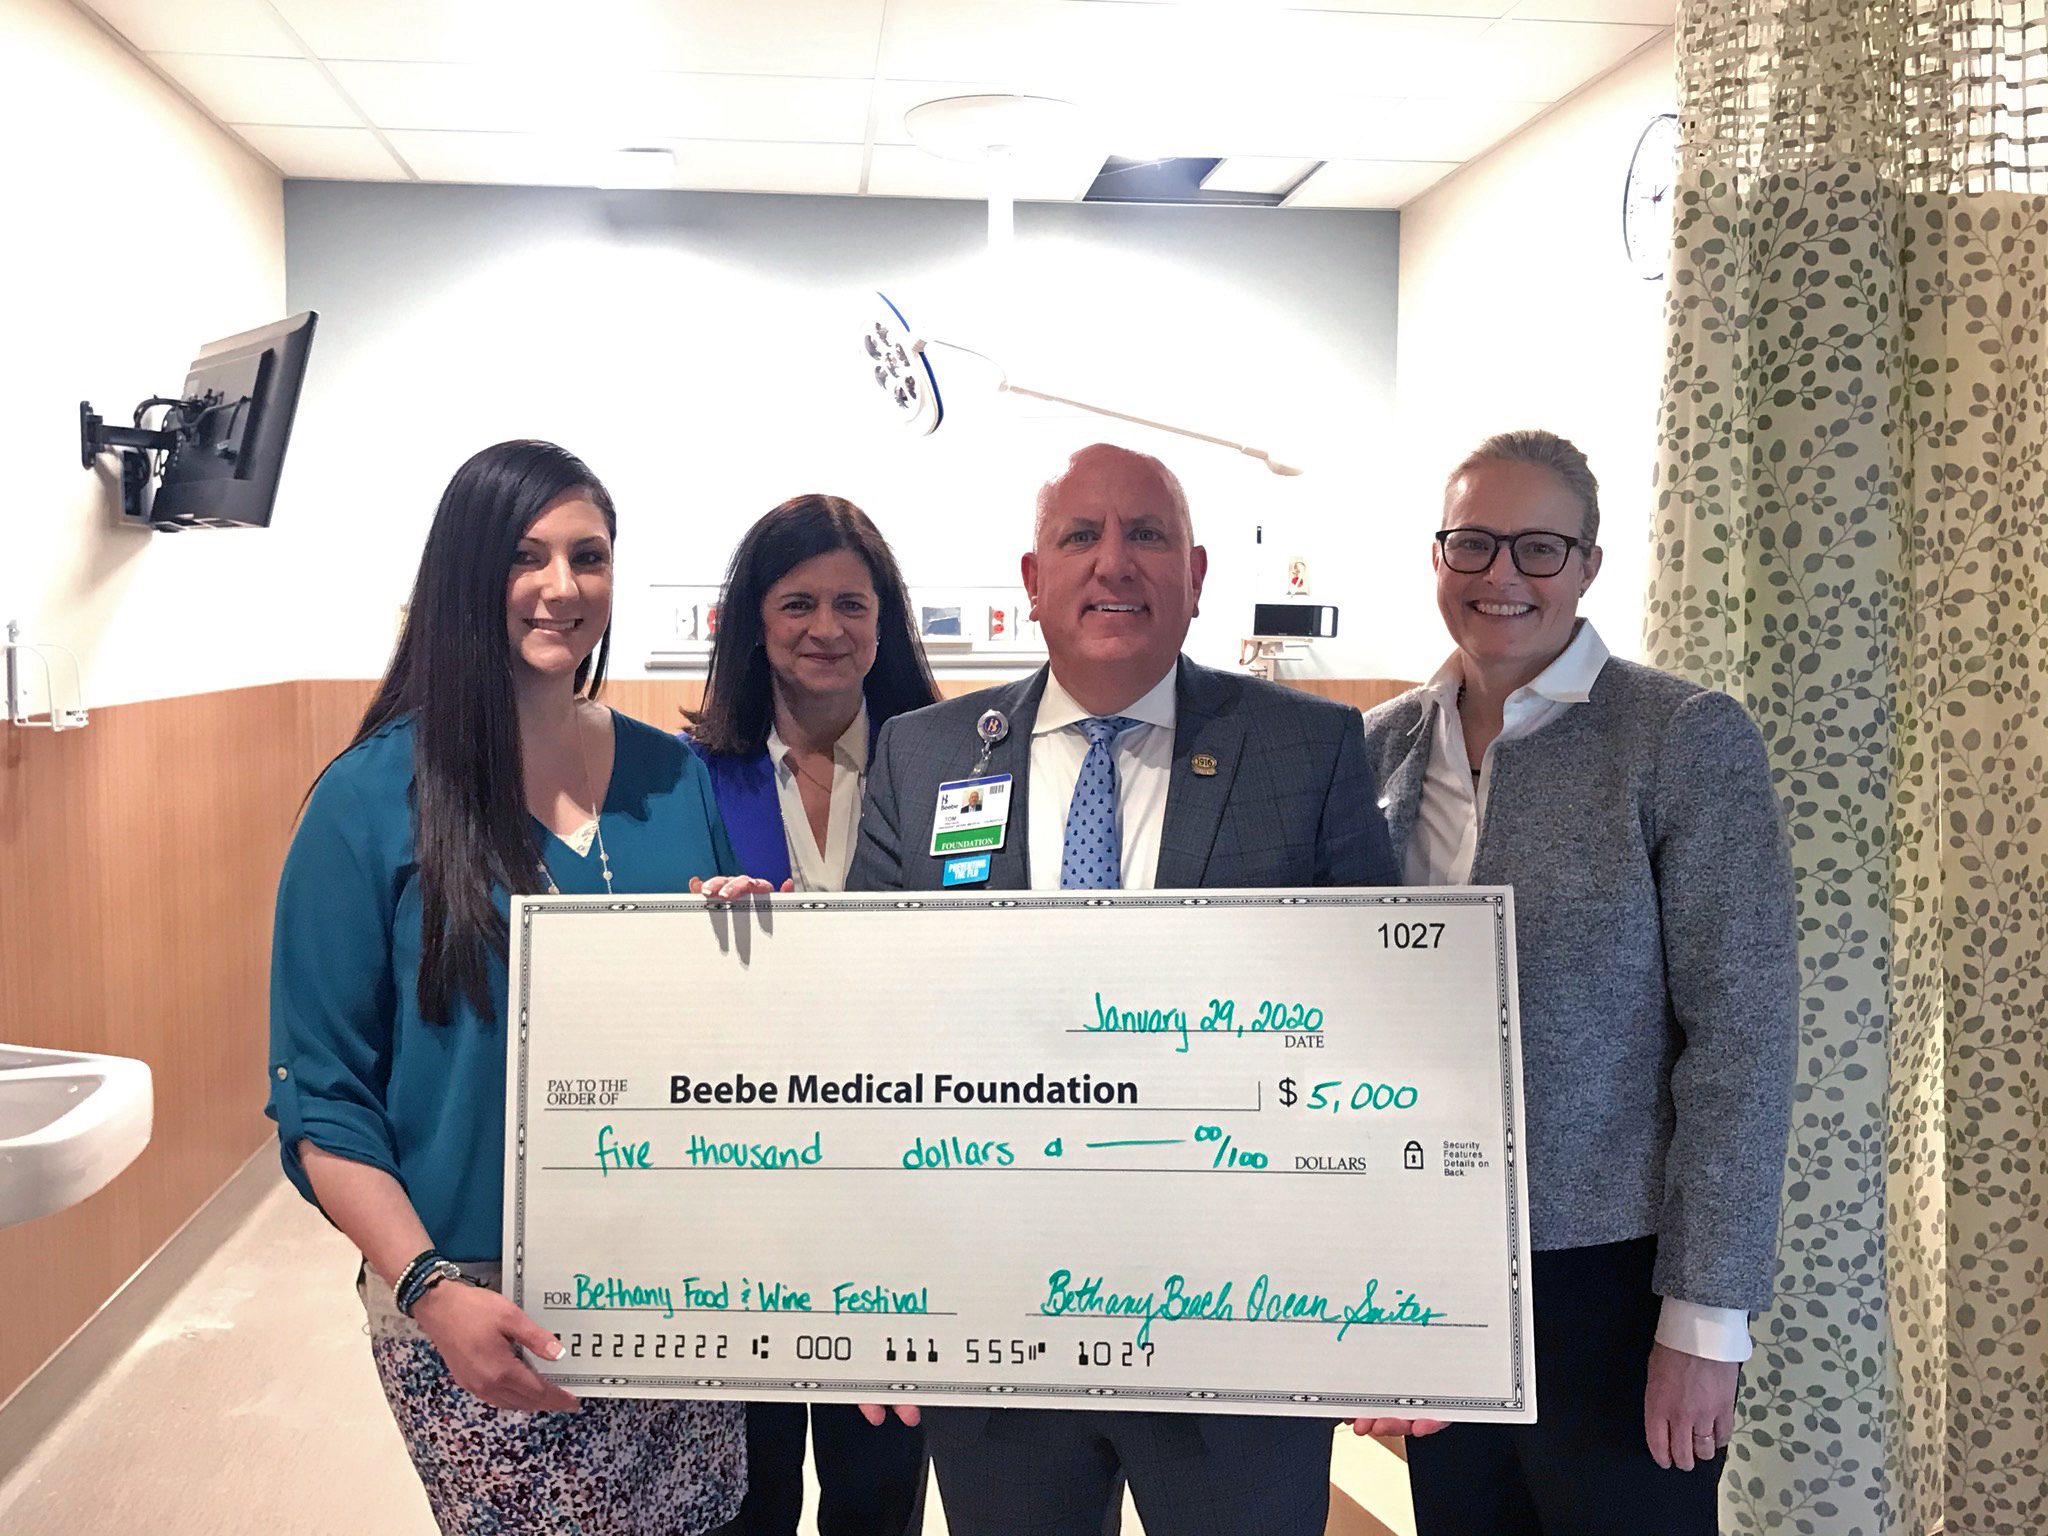 Lorrie Miller, General Manager, Bethany Beach Ocean Suites, Susan Todaro, Activities Director, Bethany Beach Ocean Suites, Tom Protack, President, Beebe Medical Foundation, and Kay Young, Vice President of Development, Beebe Medical Foundation, pose for a